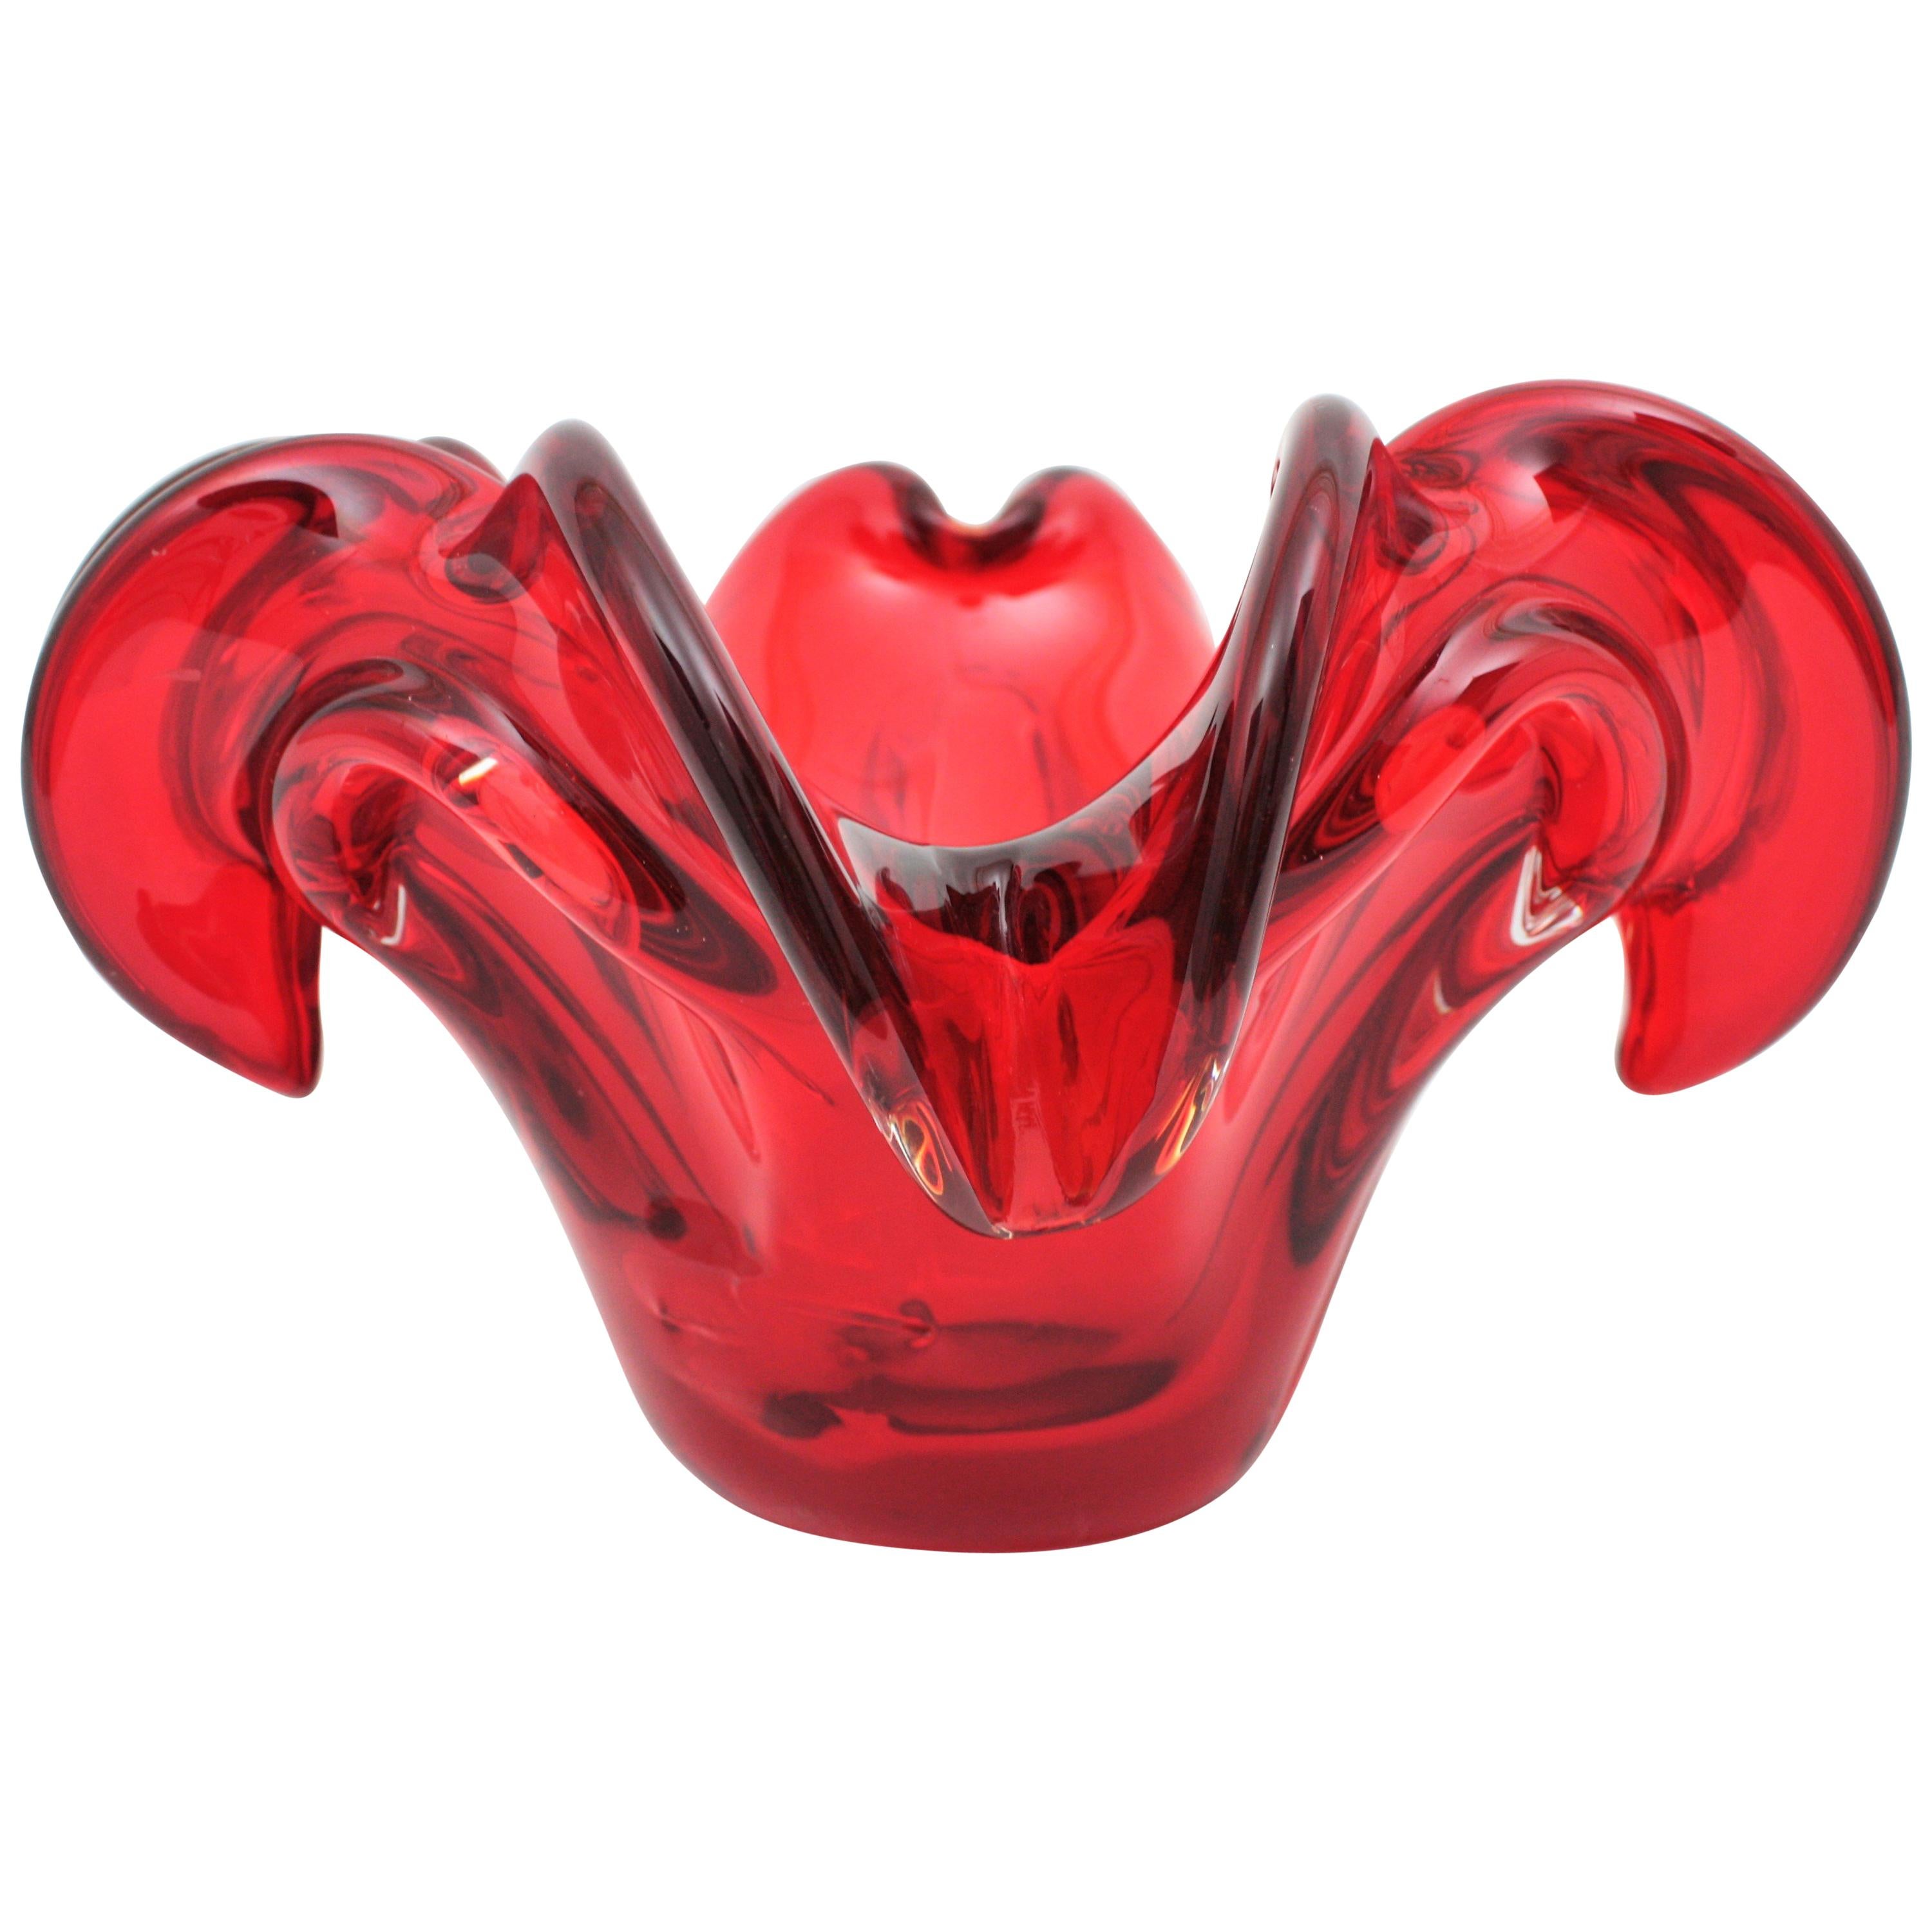 Mid-Century Modern Large Archimede Seguso Murano Ruby Red Sommerso Art Glass Centerpiece Bowl